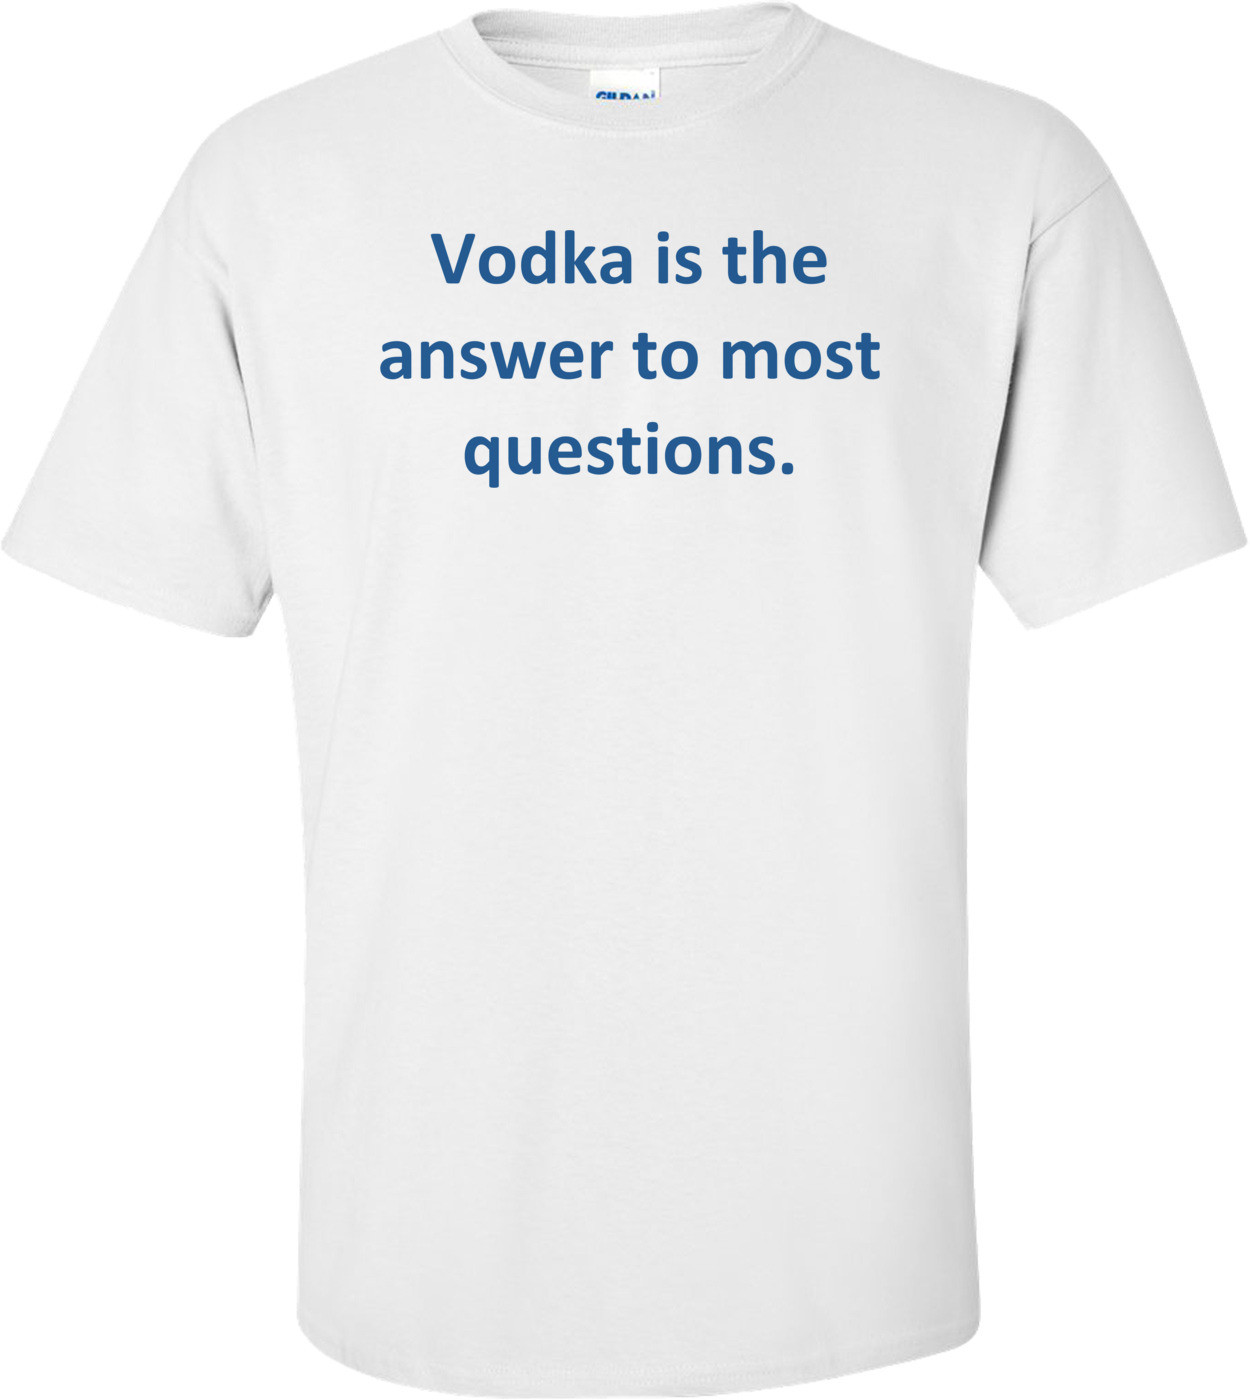 Vodka is the answer to most questions.